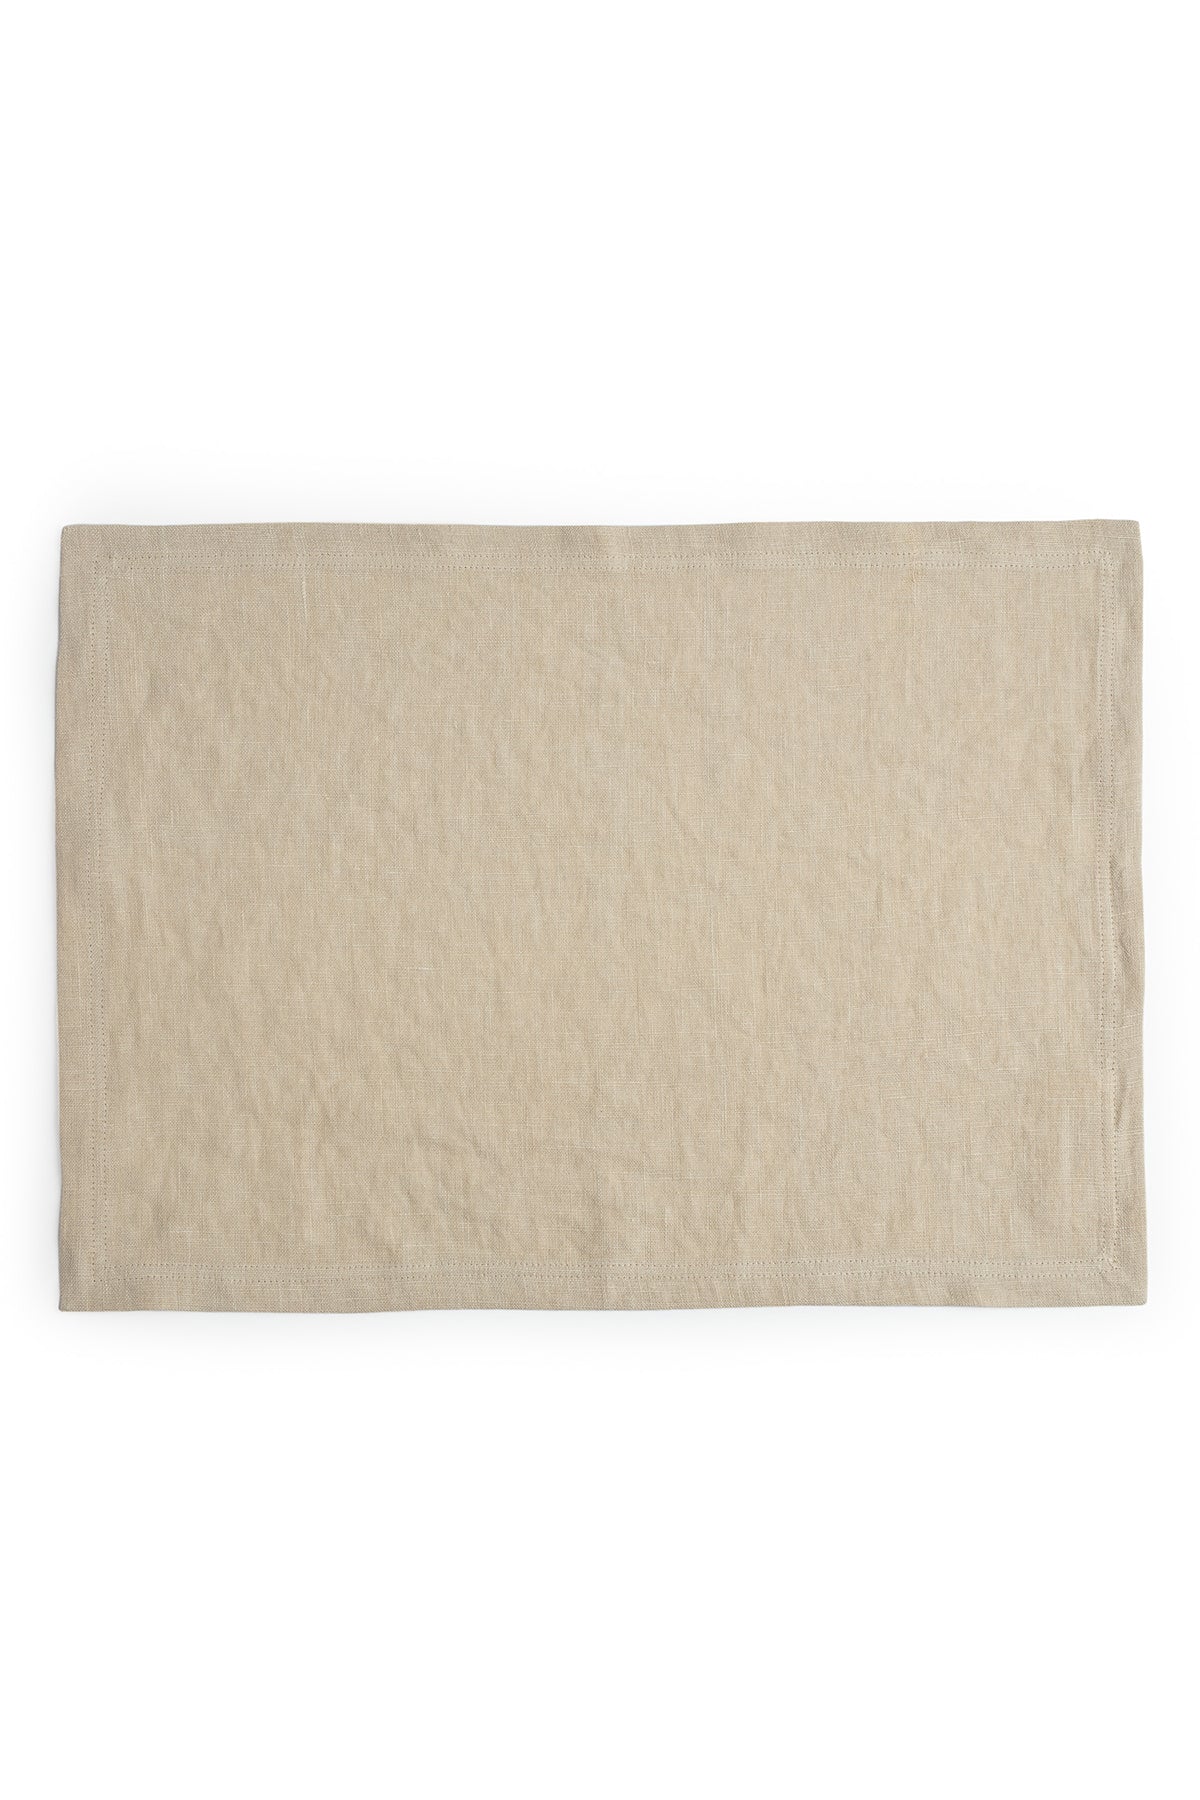 A beige linen placemat by Jenny Graham Home to accessorize a table.-15072810303681